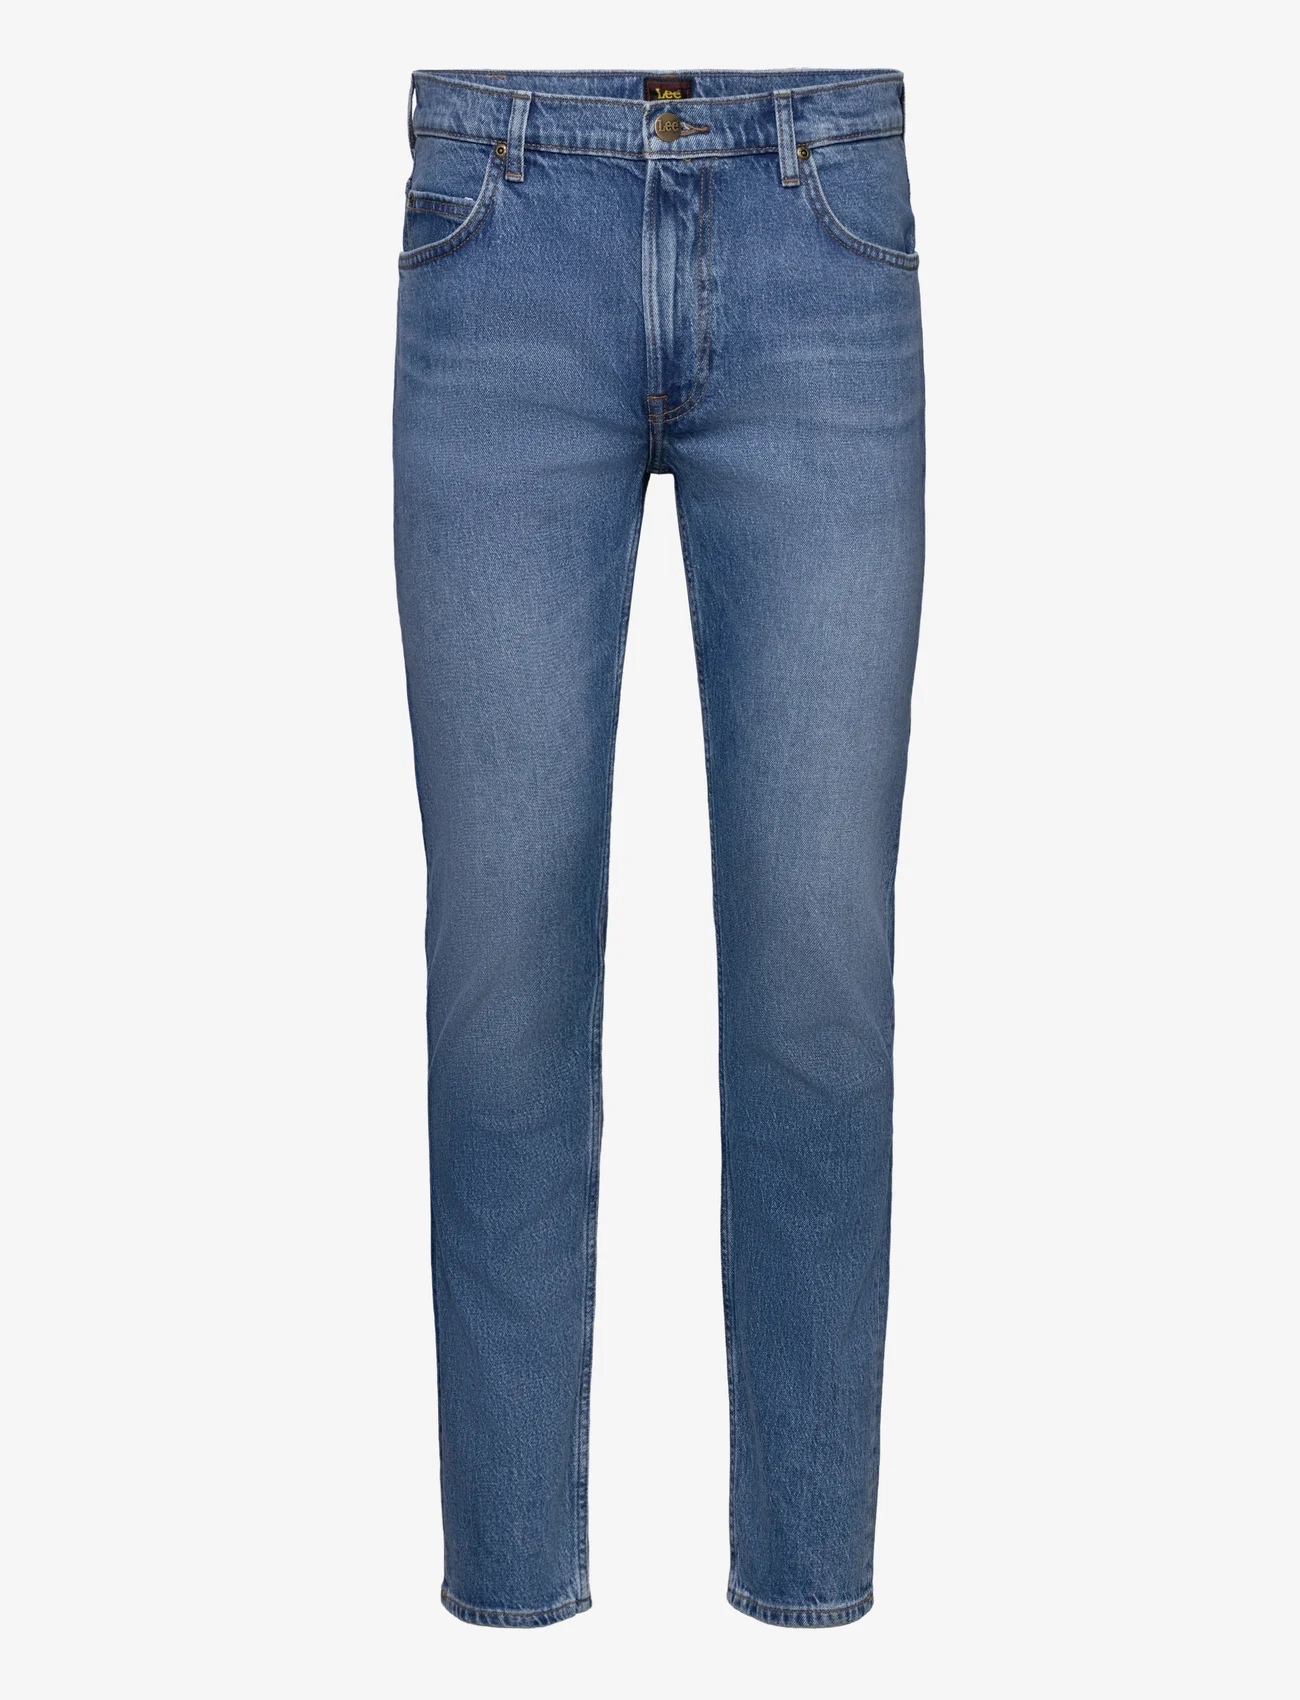 Lee Jeans - RIDER - slim jeans - into the blue worn - 0